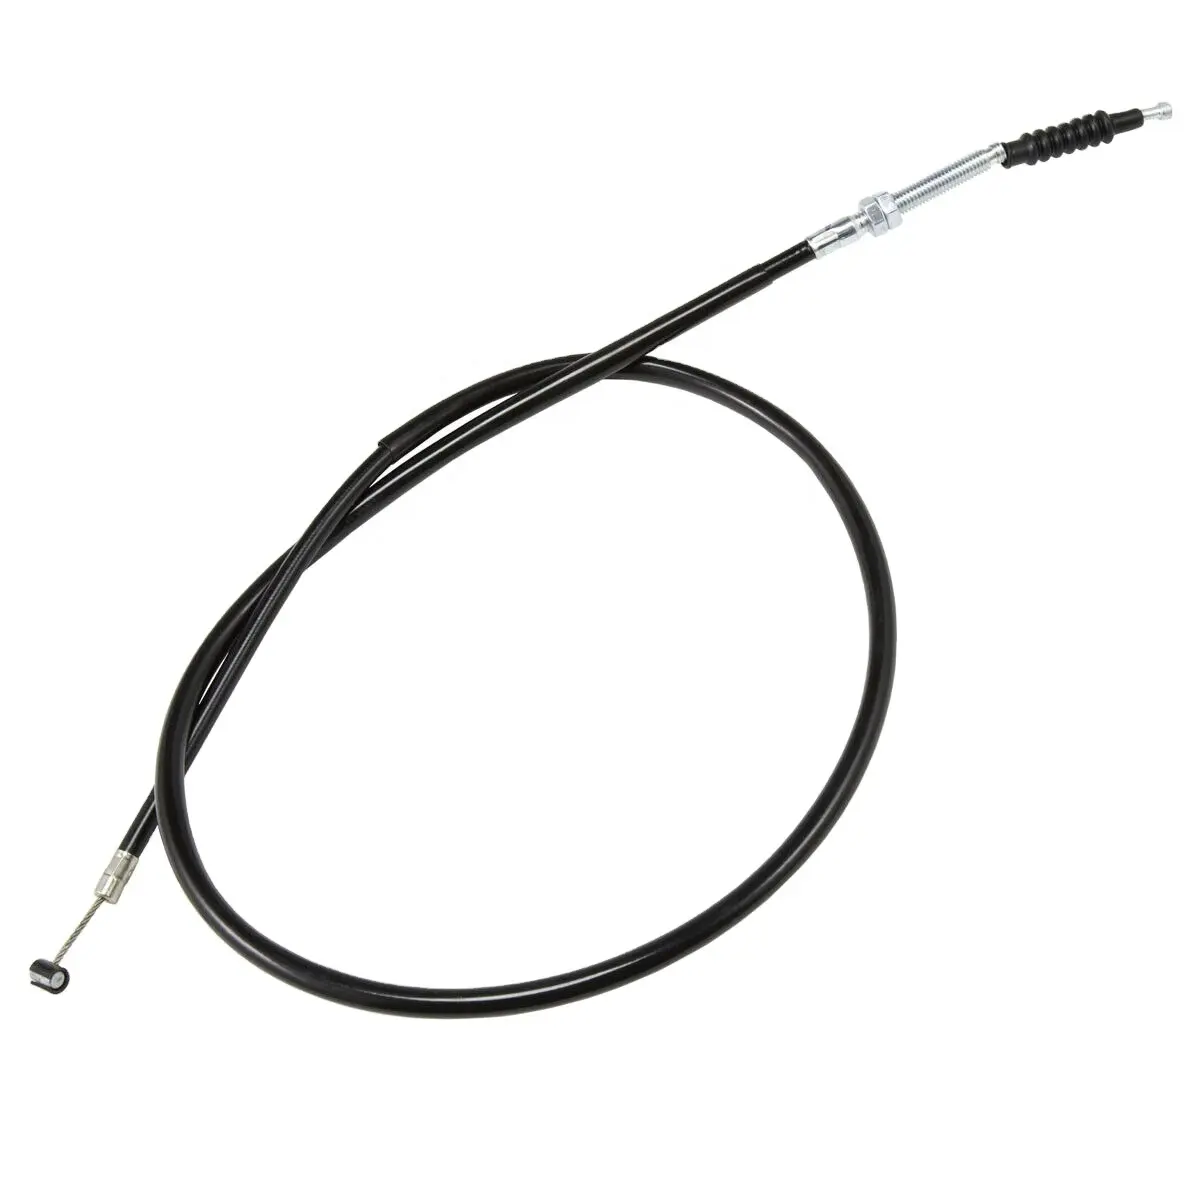 High quality reliable quality Rear Hand Brake Cable OEM43460-HN8-000 brake cable